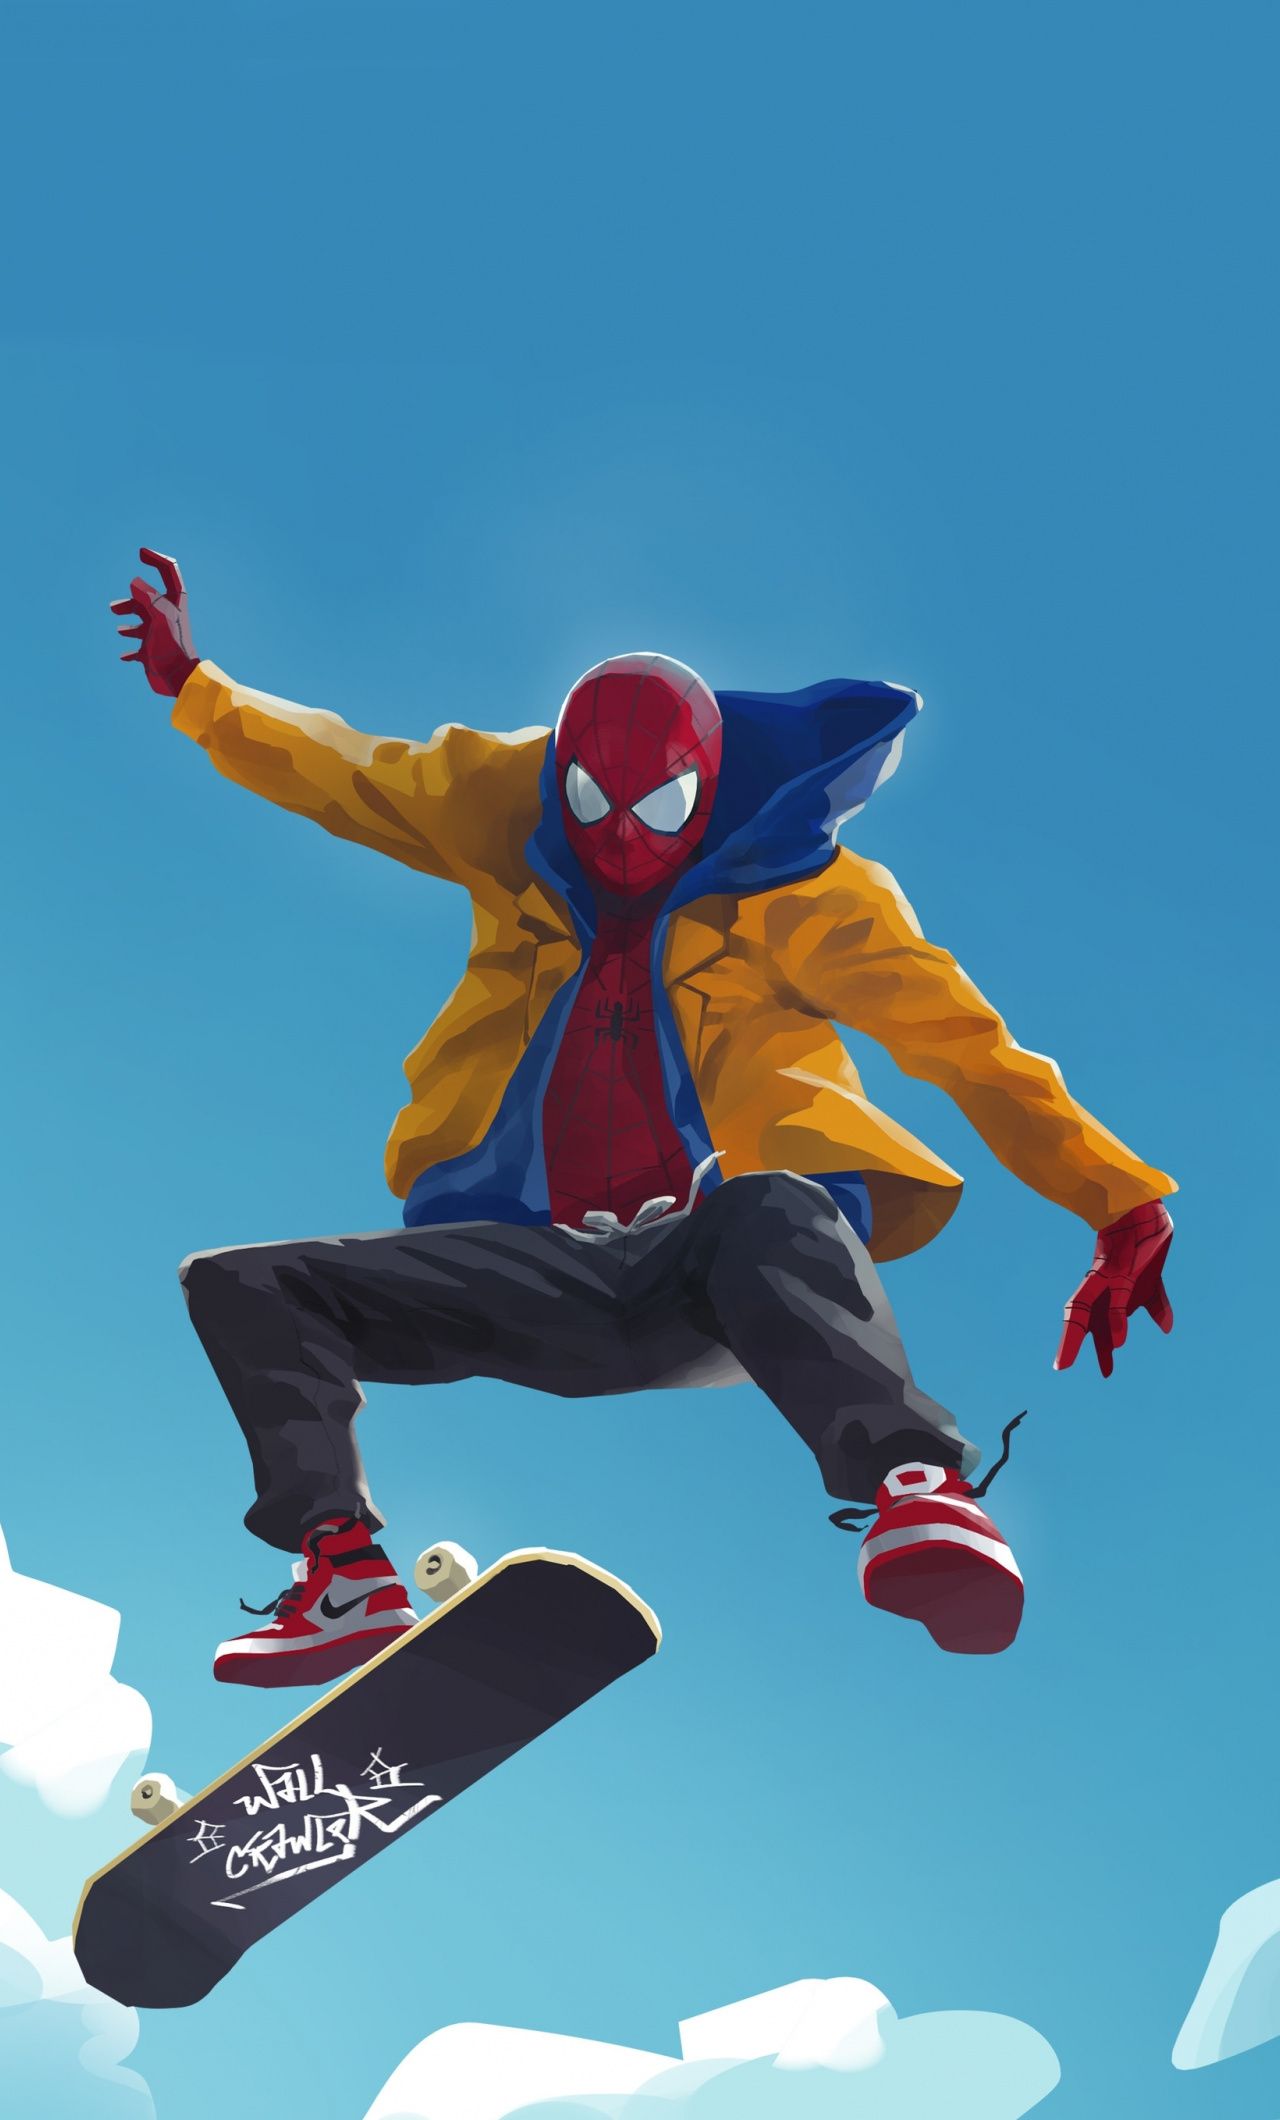 A spiderman character is flying through the air on his skateboard - Skate